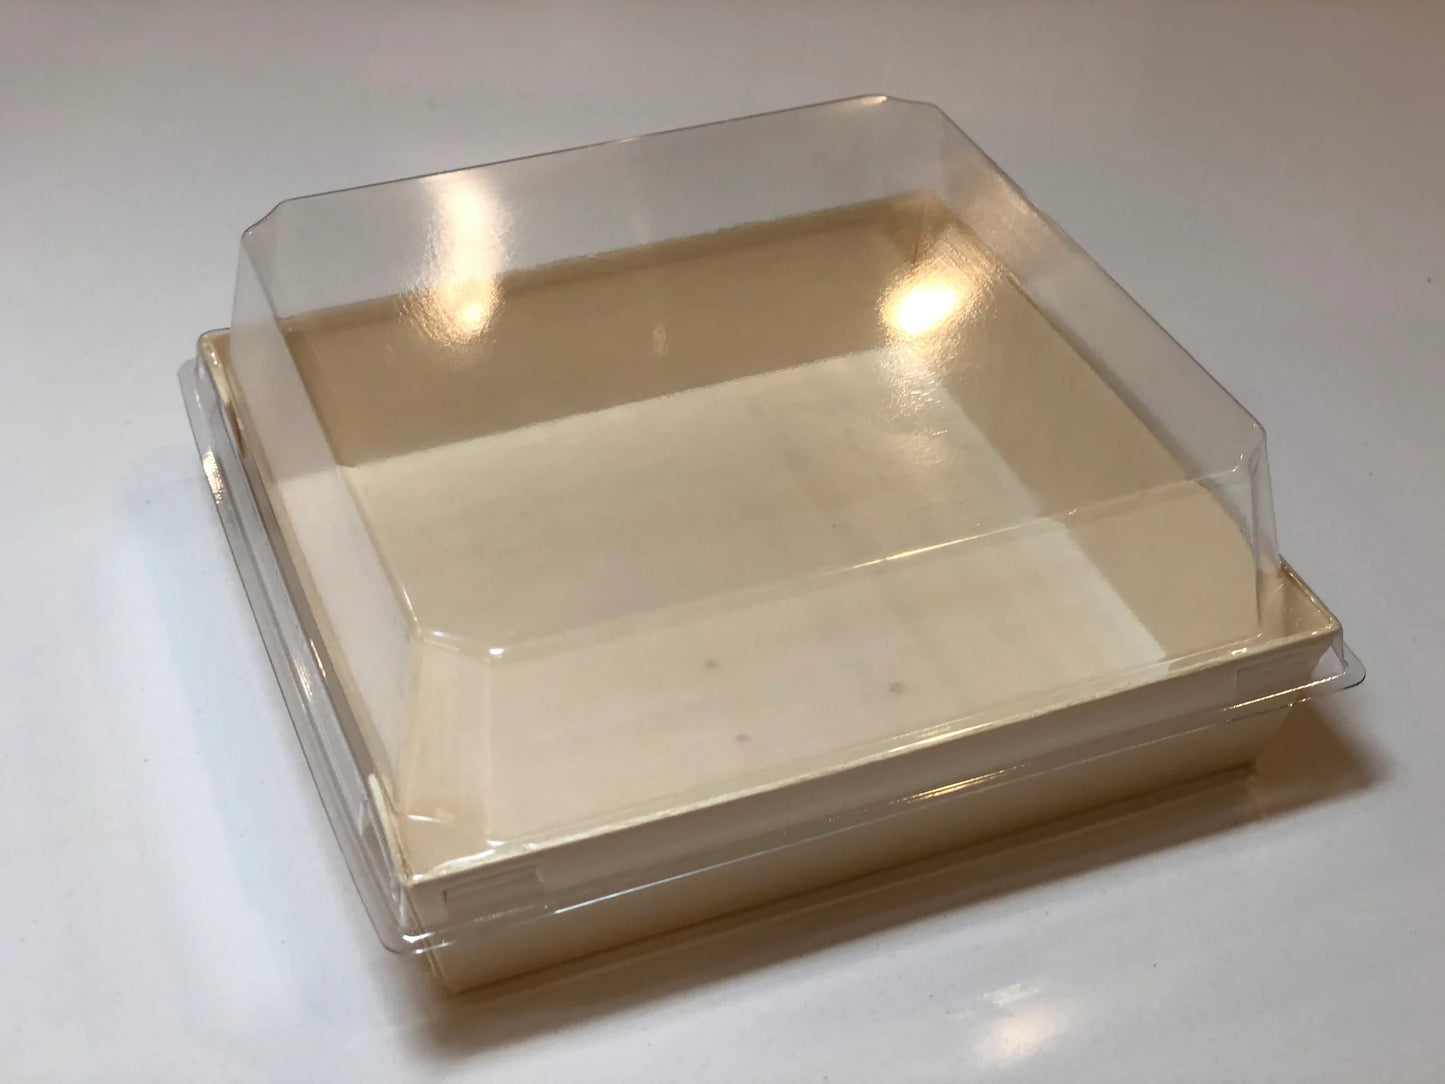 4.6" X 4.6" Covered Tray Set | Compostable Balsa Tray with RPET Lid | 100 of each